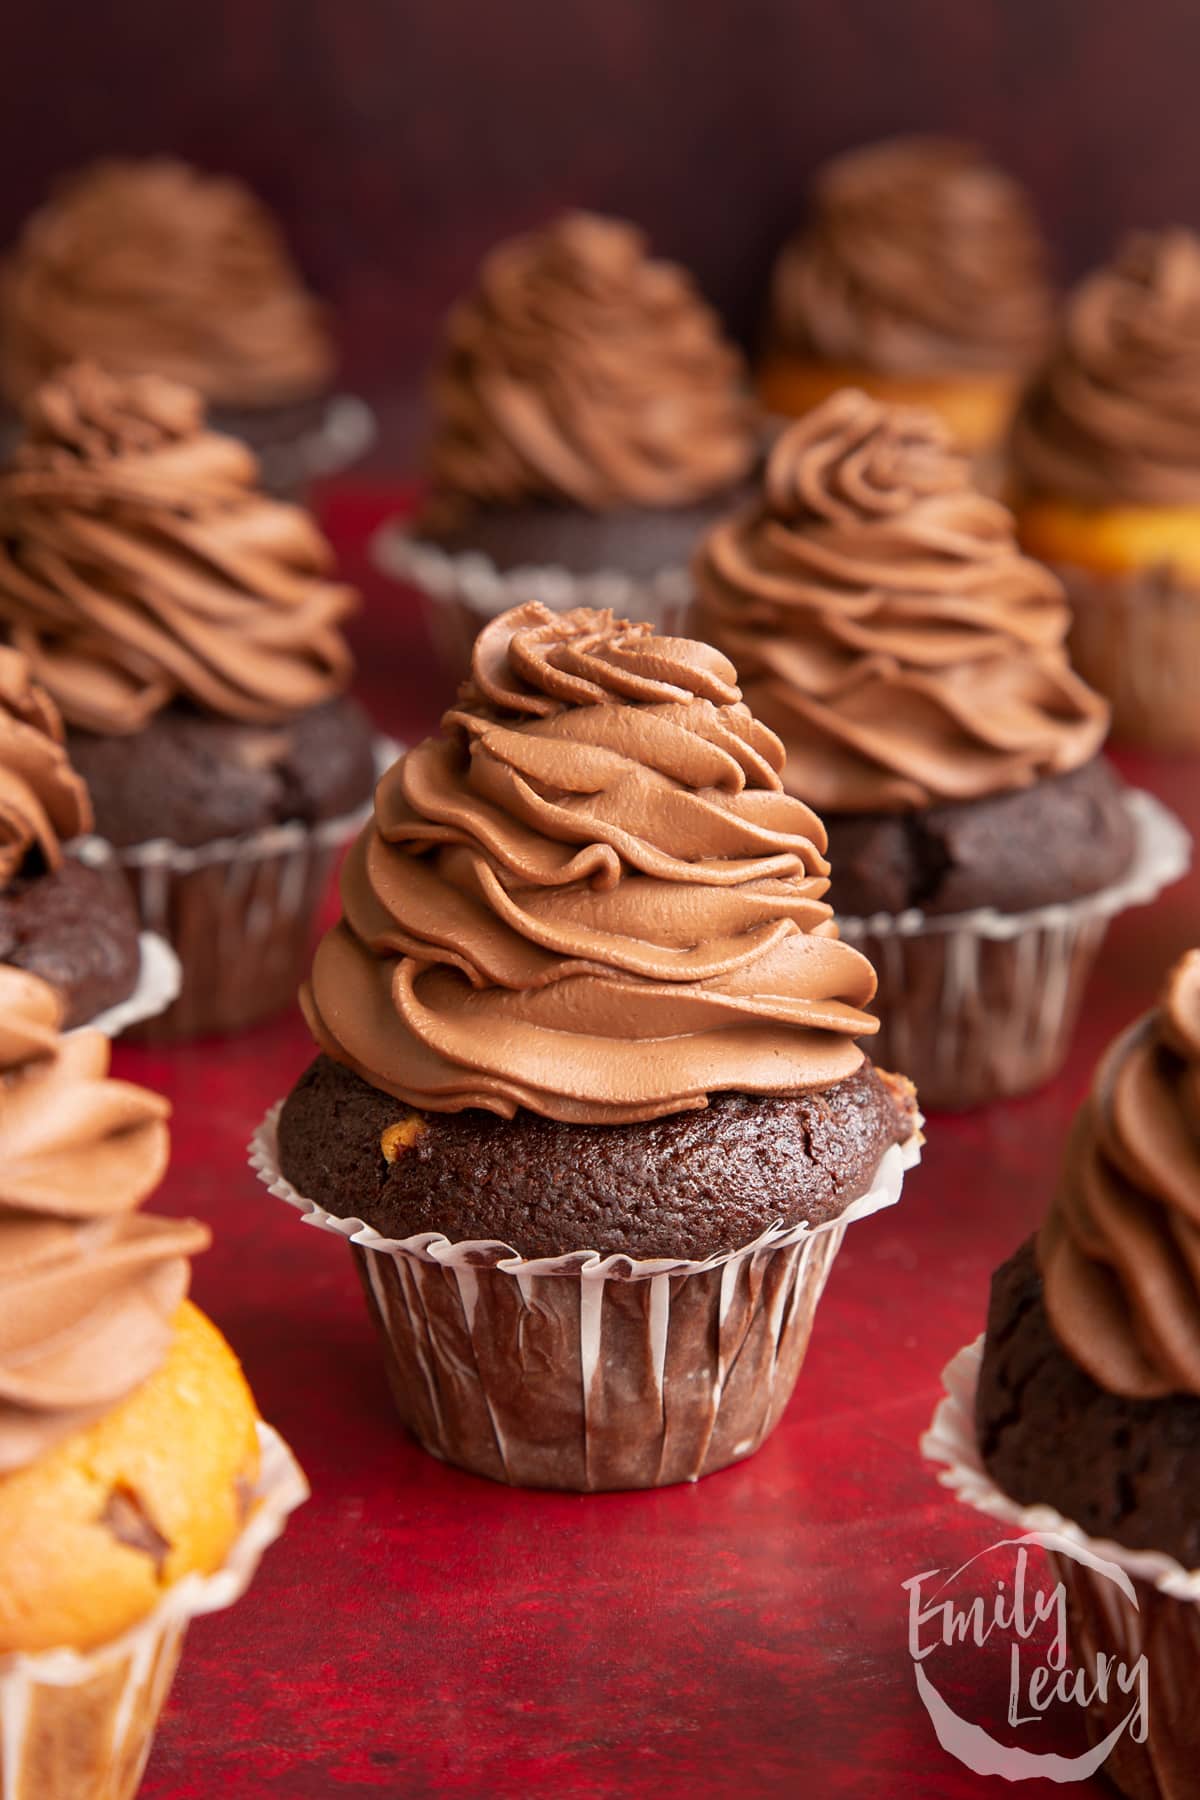 Chocolate muffins with chocolate buttercream icing.